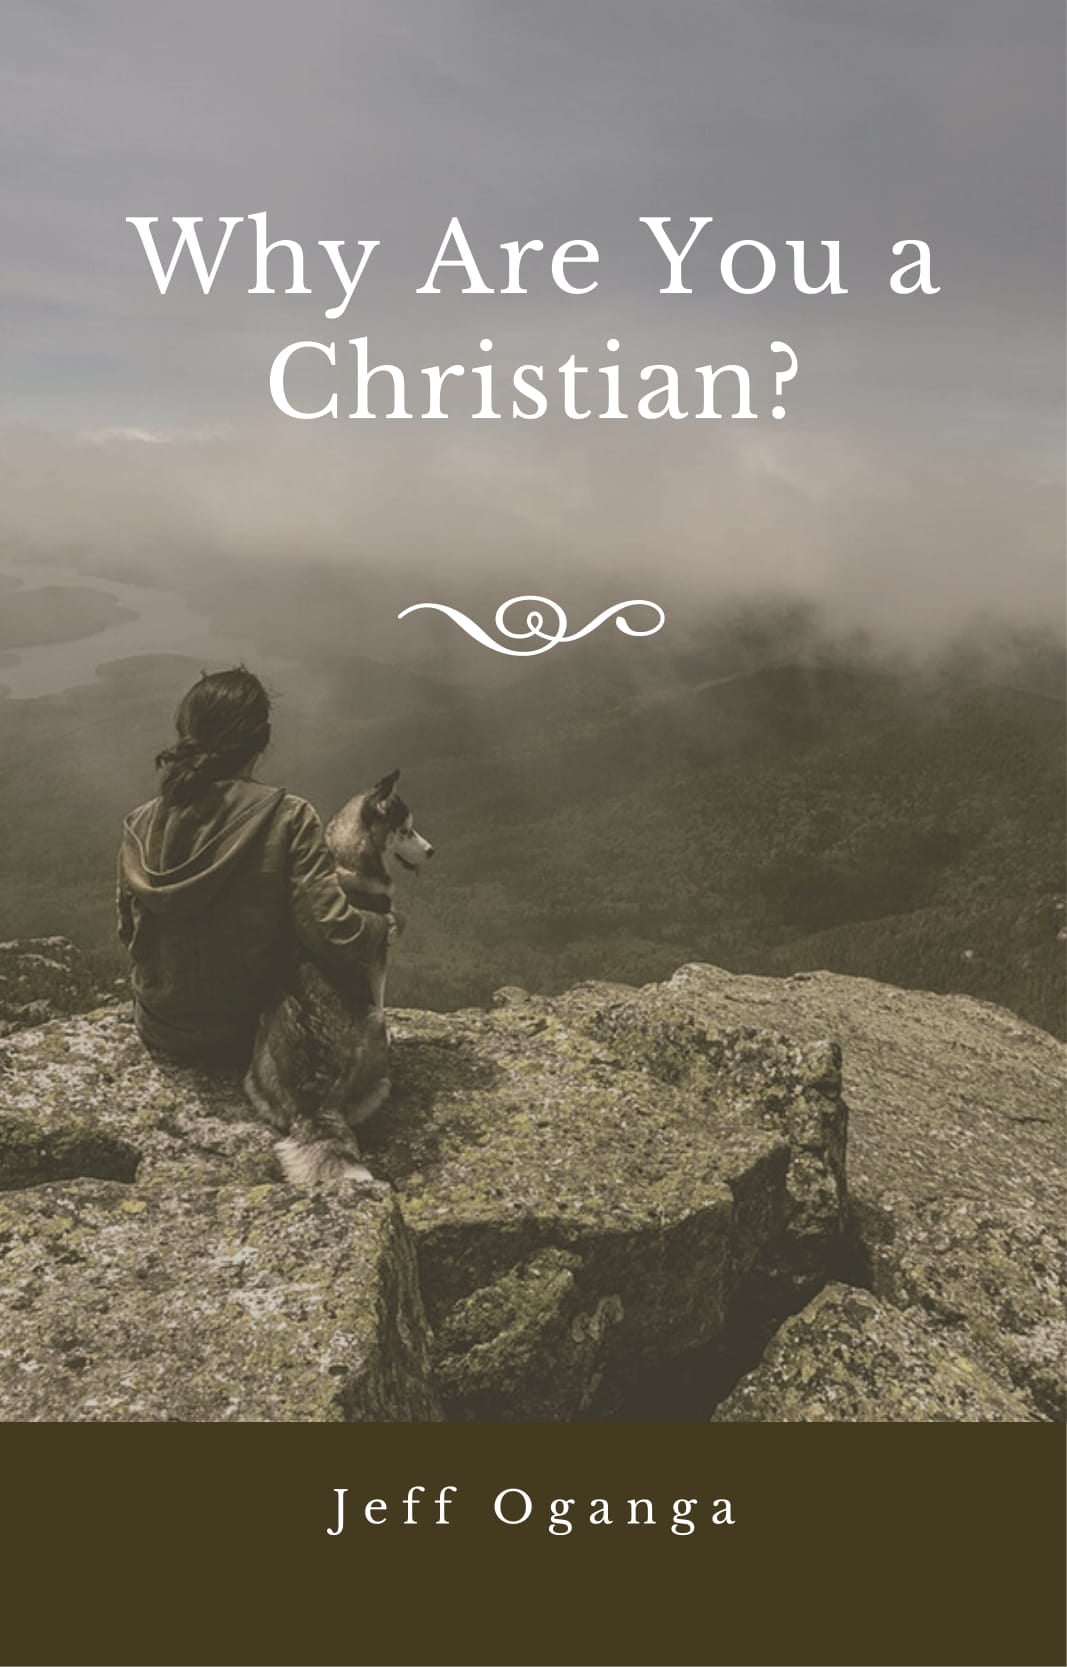 Why Are You a Christian?